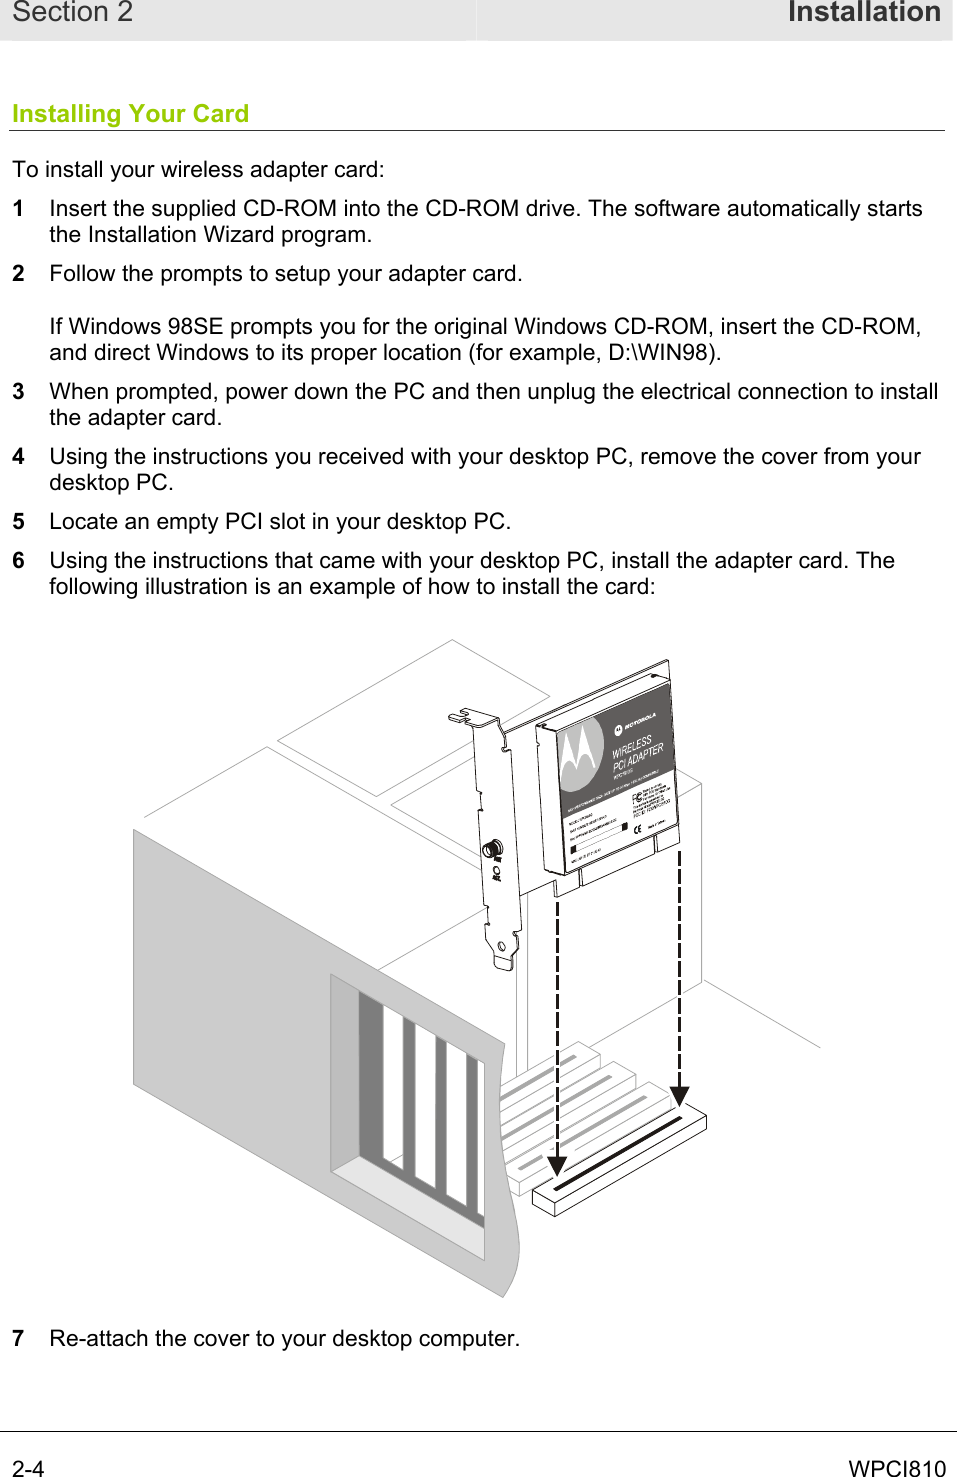 Section 2  Installation 2-4  WPCI810 Installing Your Card To install your wireless adapter card: 1  Insert the supplied CD-ROM into the CD-ROM drive. The software automatically starts the Installation Wizard program.  2  Follow the prompts to setup your adapter card.  If Windows 98SE prompts you for the original Windows CD-ROM, insert the CD-ROM, and direct Windows to its proper location (for example, D:\WIN98). 3  When prompted, power down the PC and then unplug the electrical connection to install the adapter card. 4  Using the instructions you received with your desktop PC, remove the cover from your desktop PC. 5  Locate an empty PCI slot in your desktop PC. 6  Using the instructions that came with your desktop PC, install the adapter card. The following illustration is an example of how to install the card:  7  Re-attach the cover to your desktop computer. 